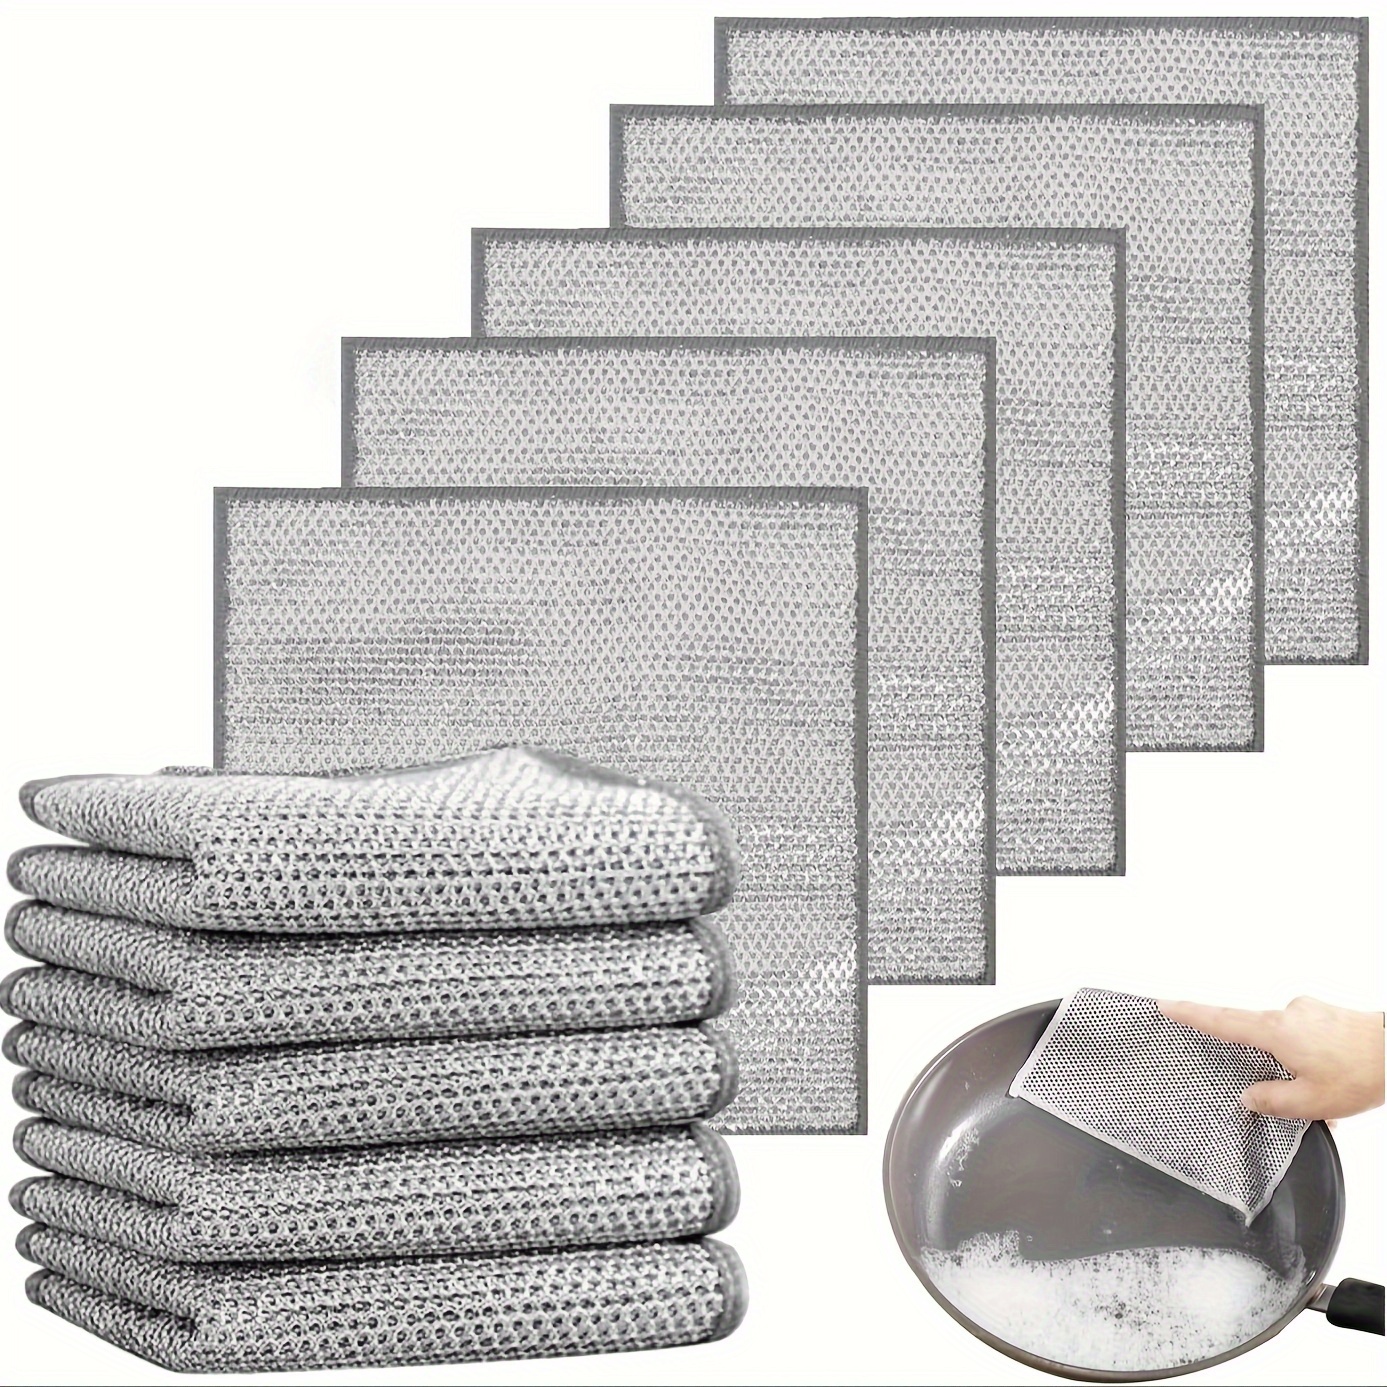 

10 Steel Wires Dishwashing Cloth, Metal Wire Scrubbing Cloth, Grid That Does Not Damage The Pot, Cleaning Cloth For Kitchen Stove, Pot Cleaning Cloth For Removing Stains, Special Purpose